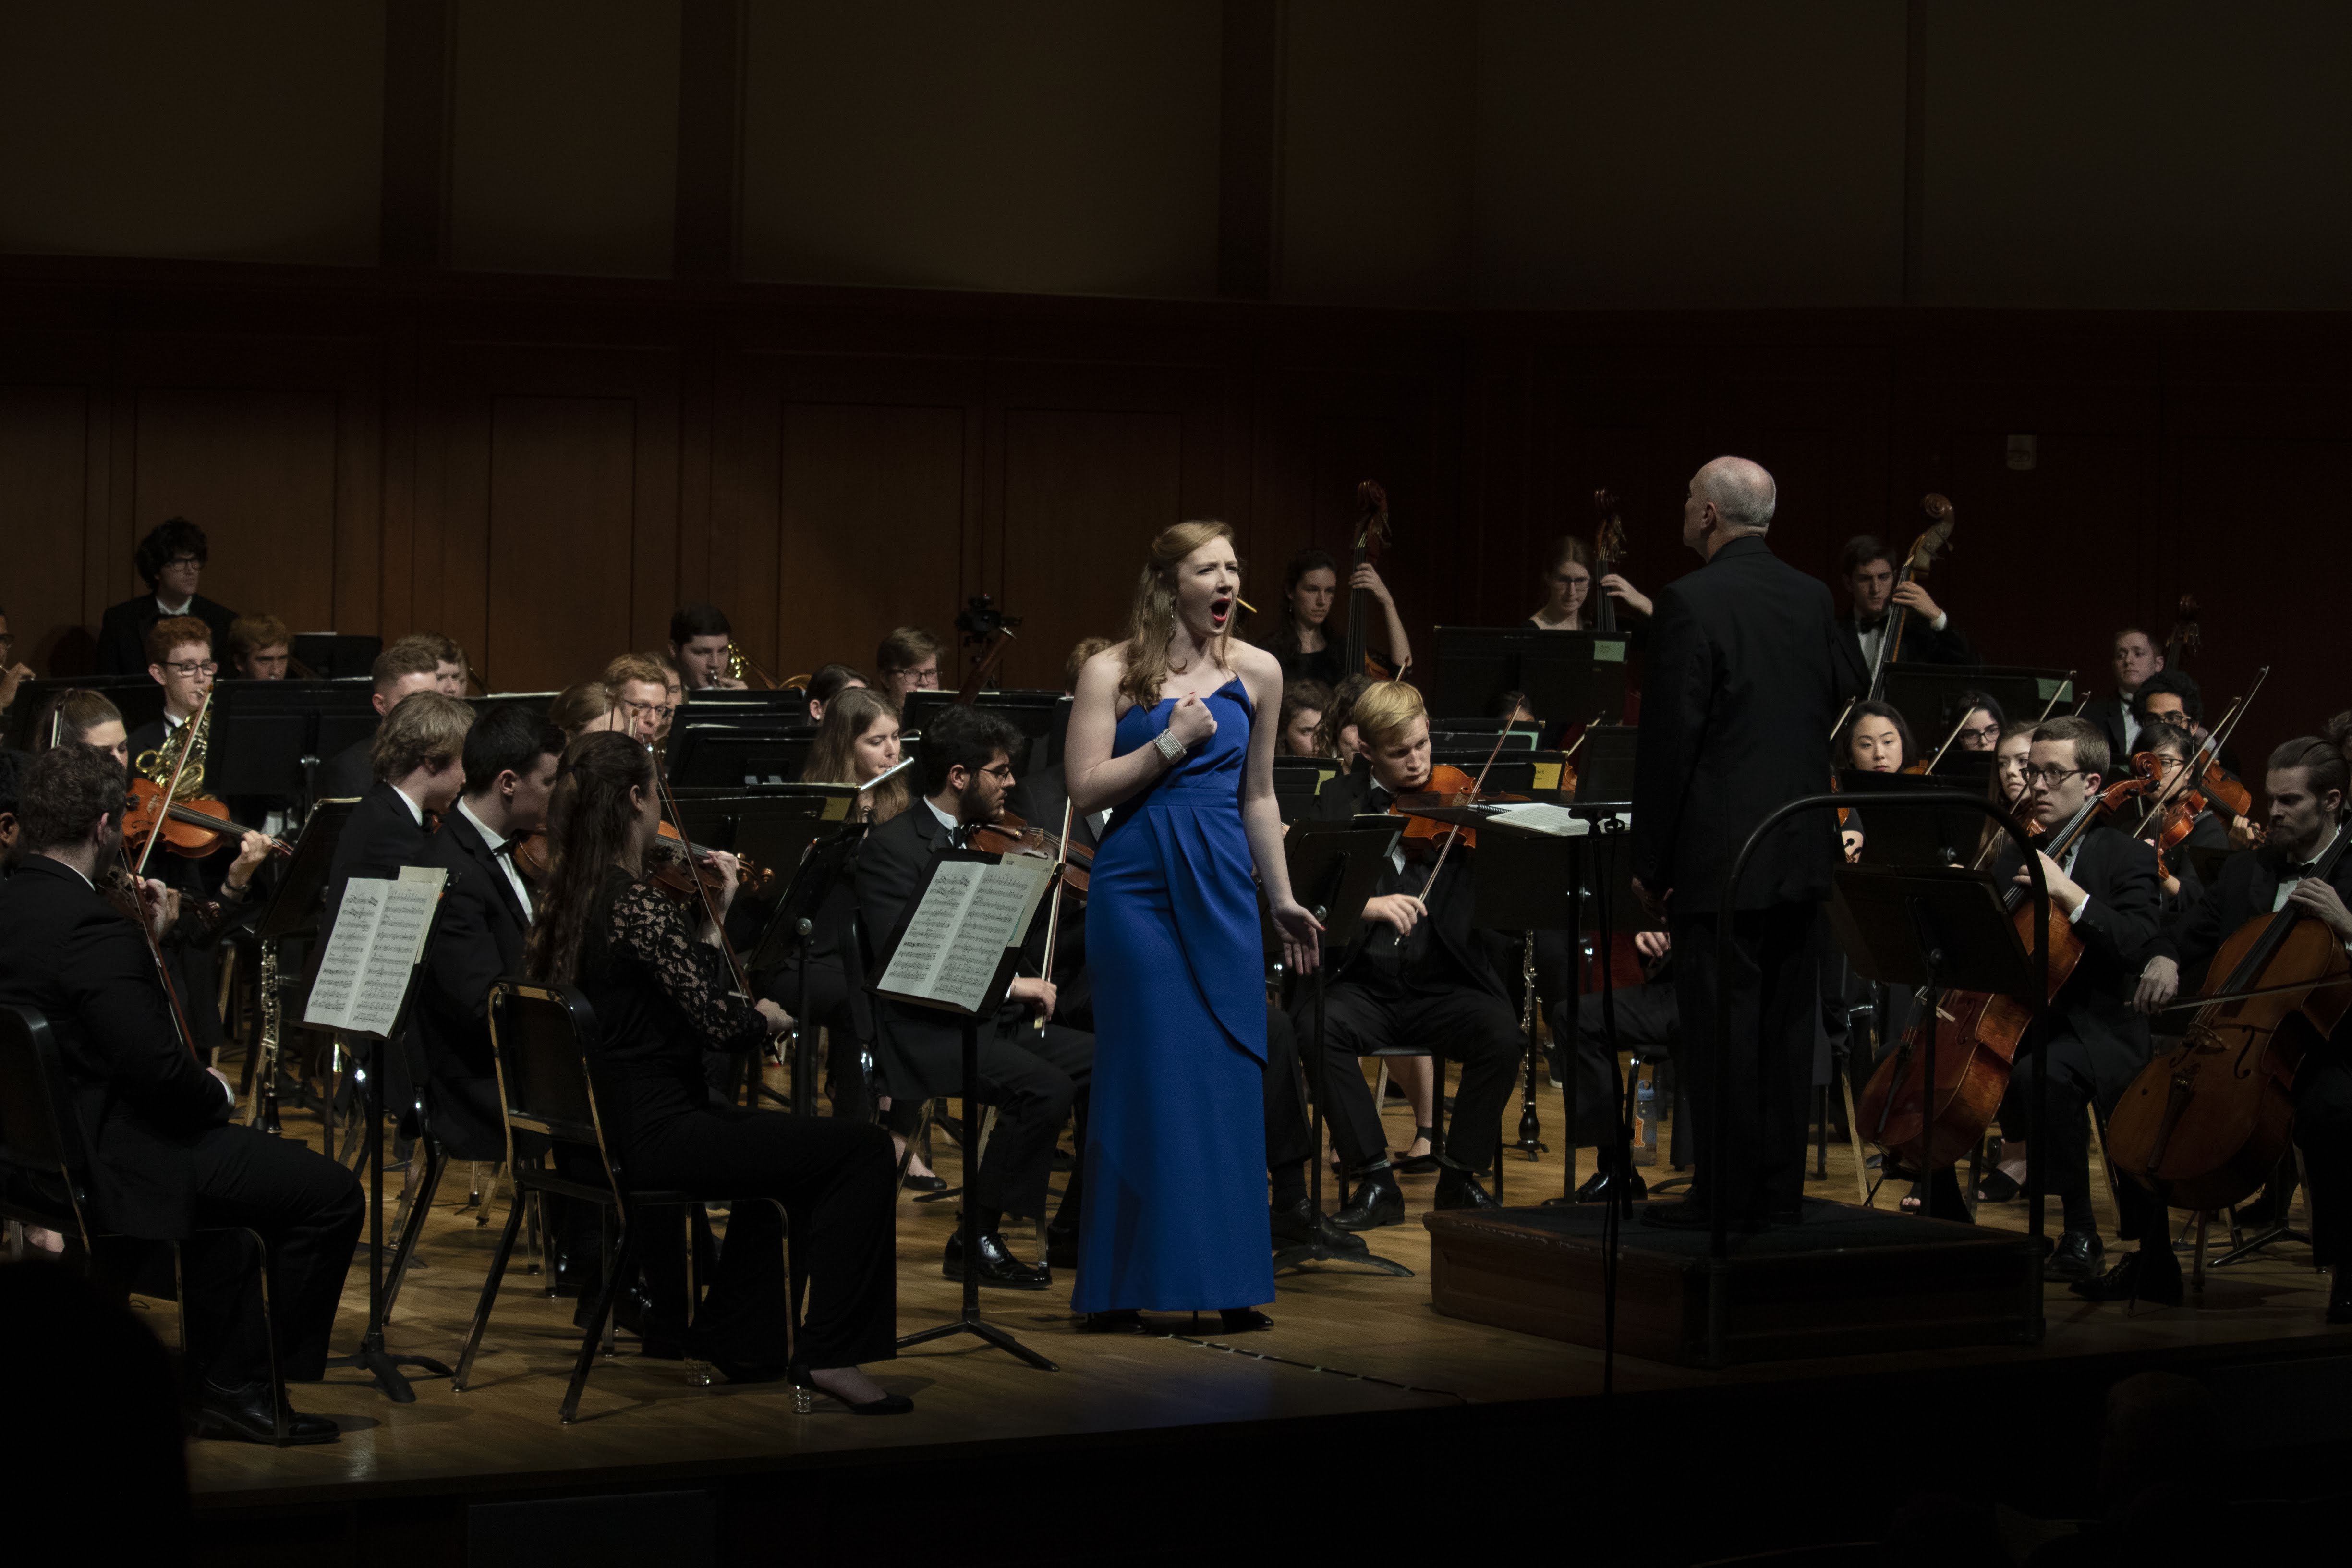 Susannah Stewart performs with the UNC Symphony Orchestra